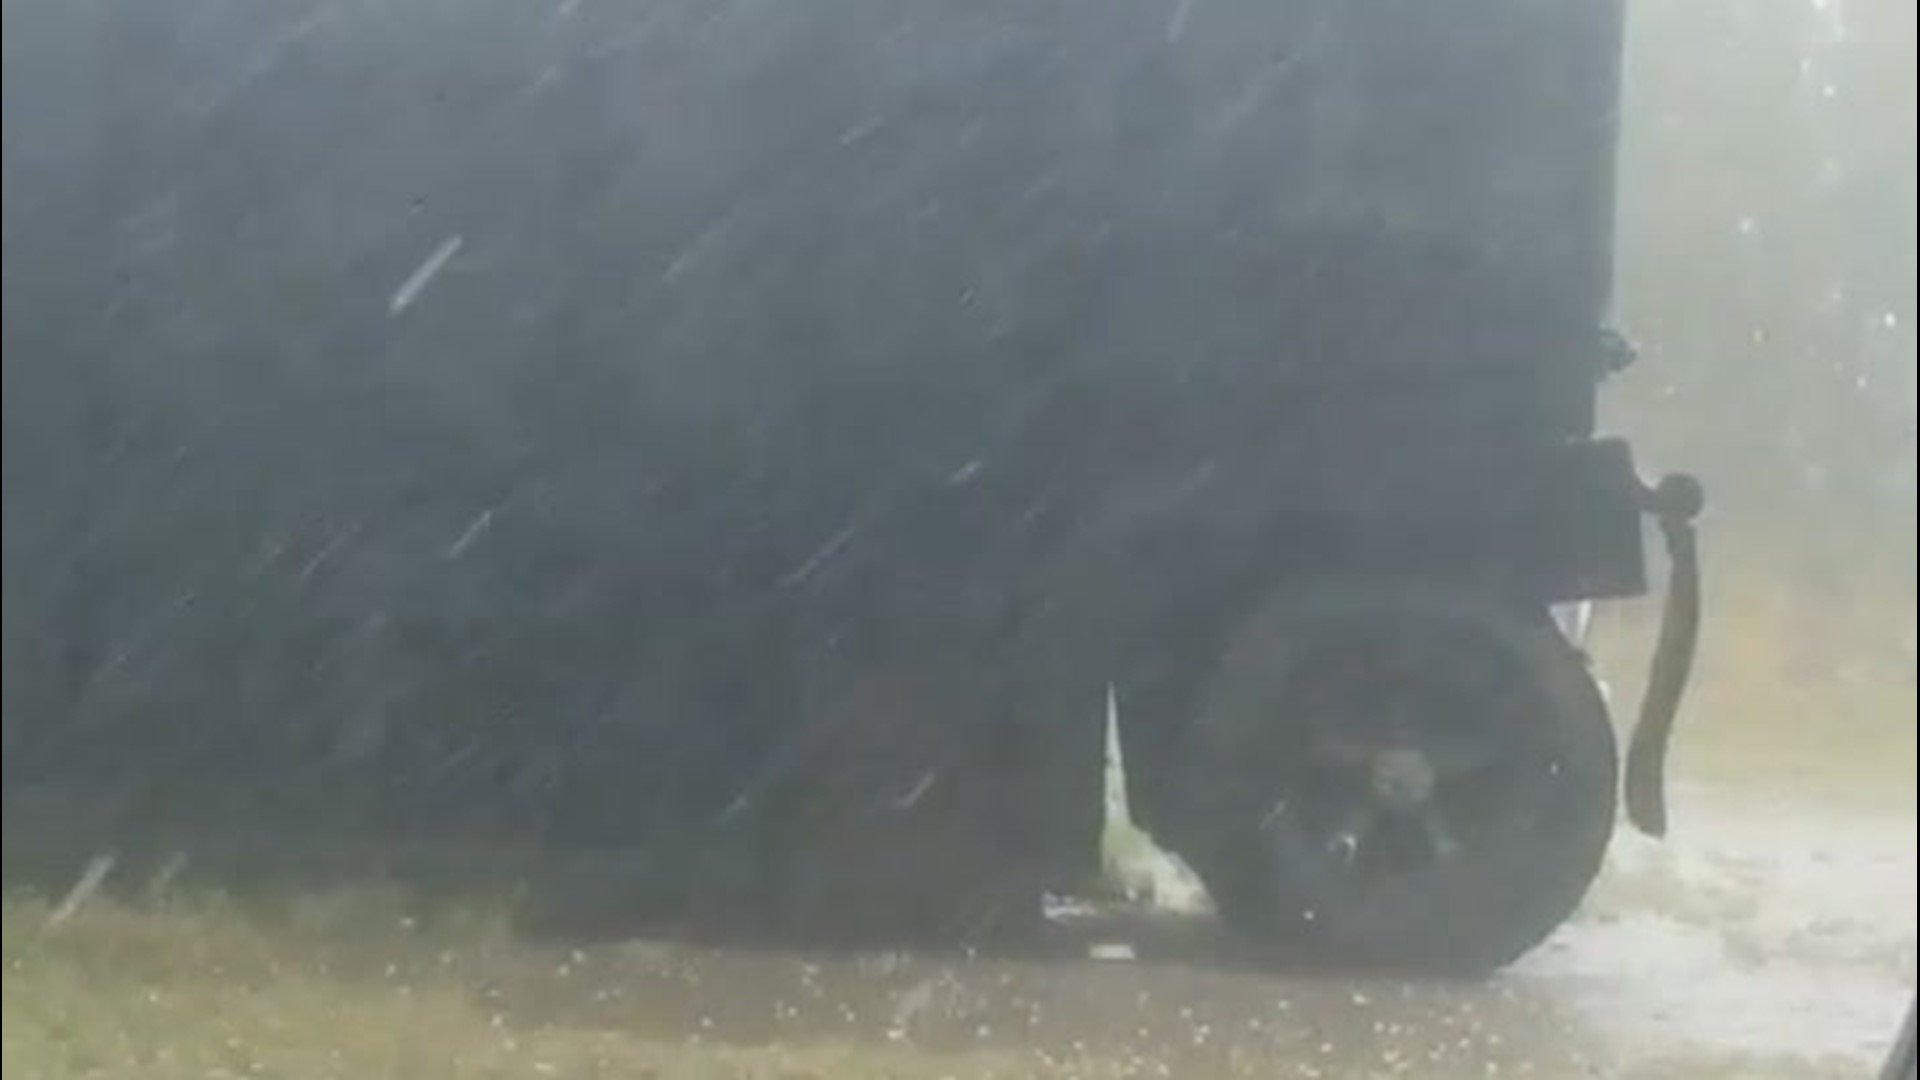 Hail and heavy rain pounded Elk City, Oklahoma, on Aug. 2, as severe thunderstorms pushed through the region.